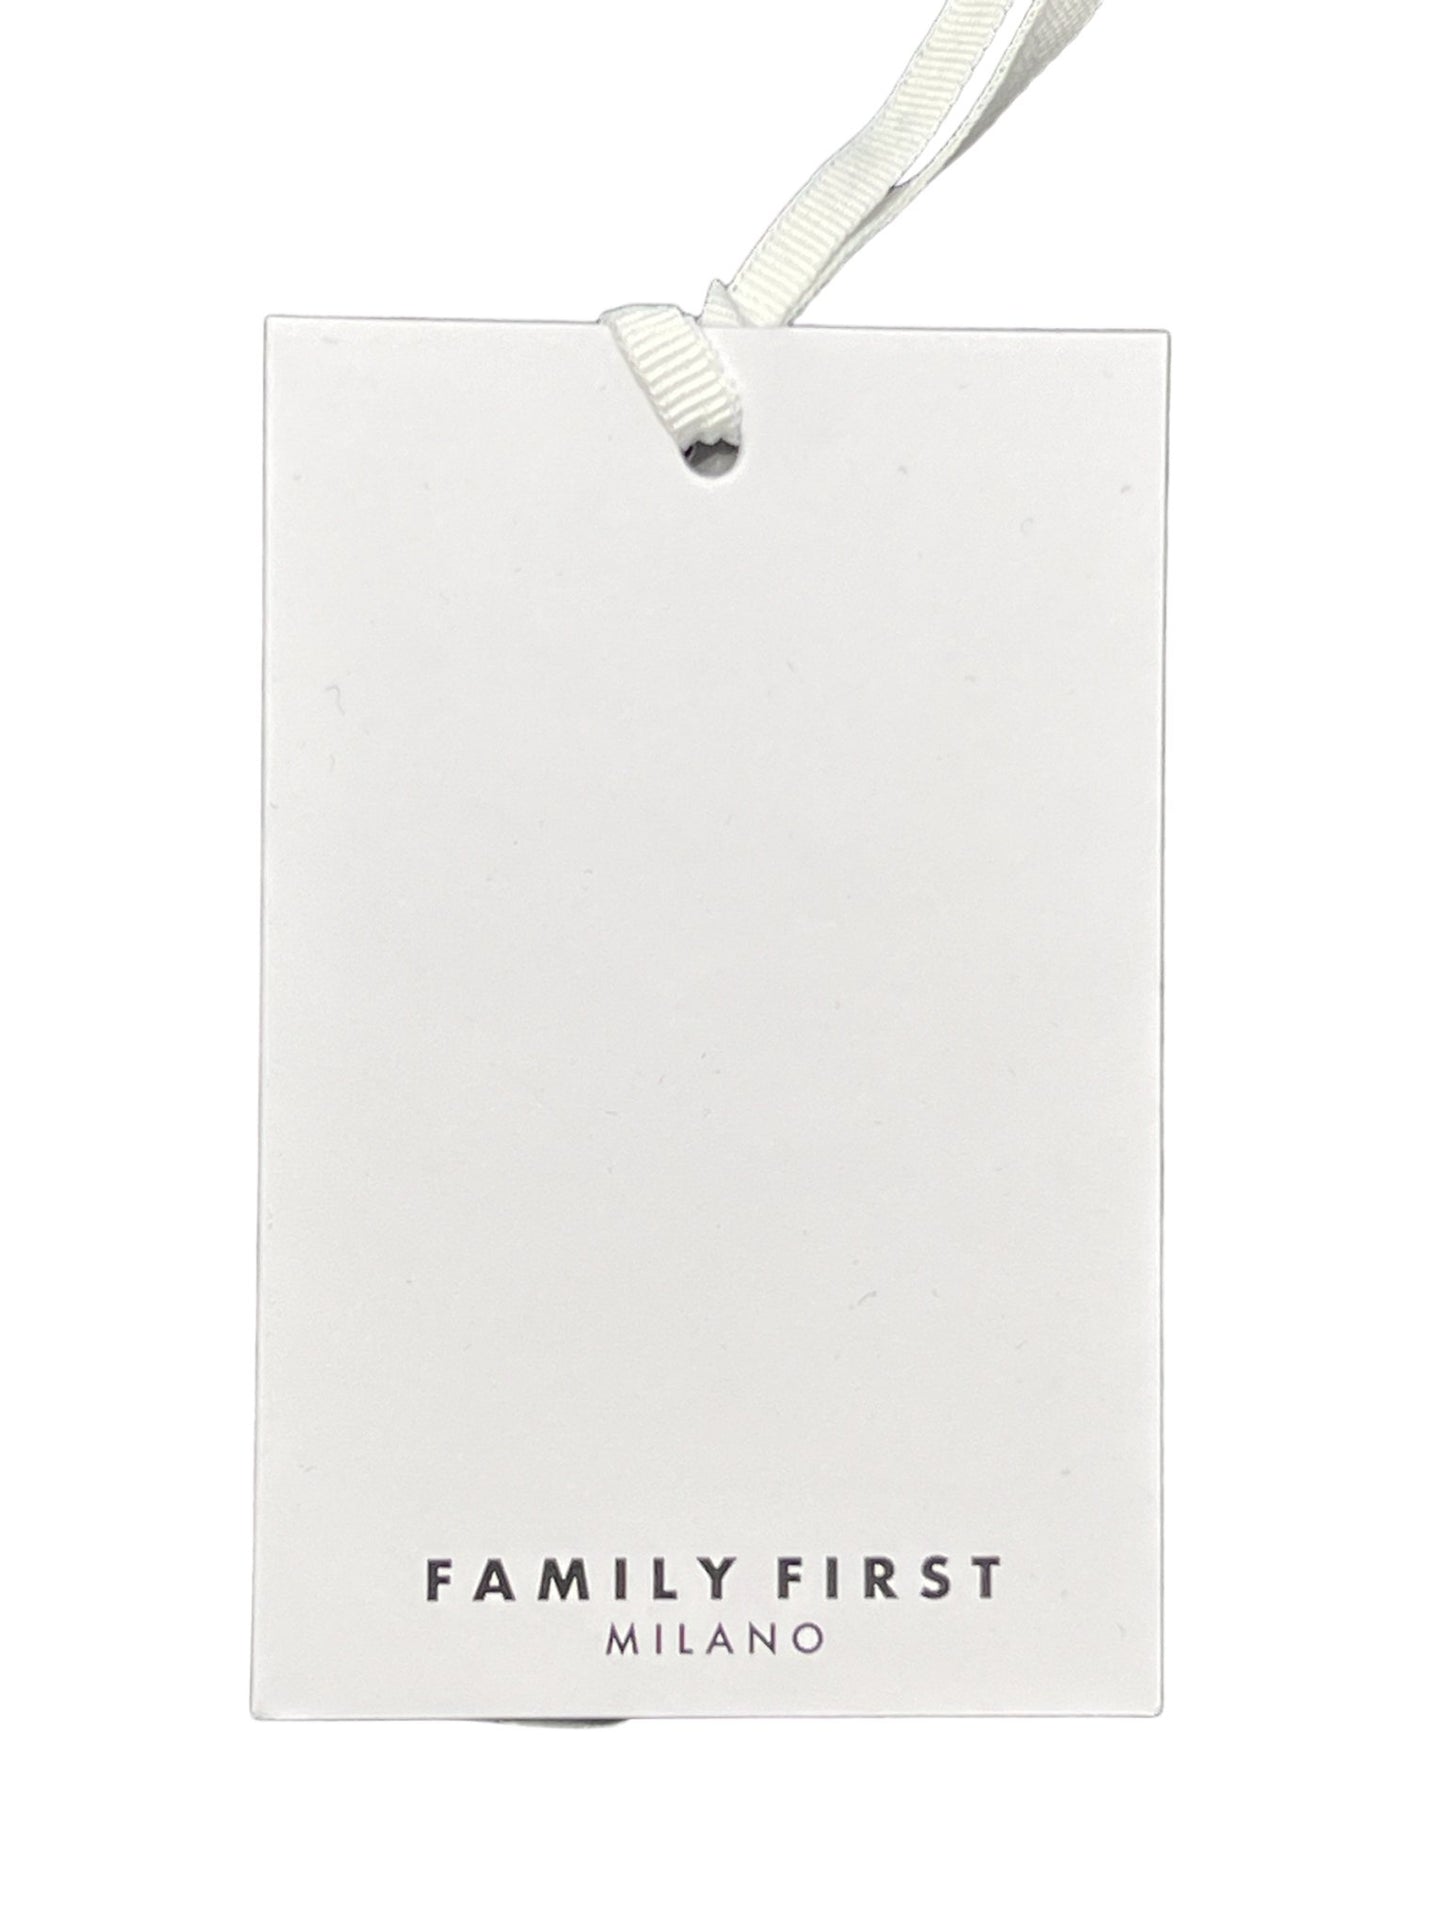 A green and white rectangular tag featuring the "FAMILY FIRST" logo at the bottom, paired with a white ribbon attached at the top, complements the FAMILY FIRST TS2407 T-SHIRT SWAN GR impeccably.